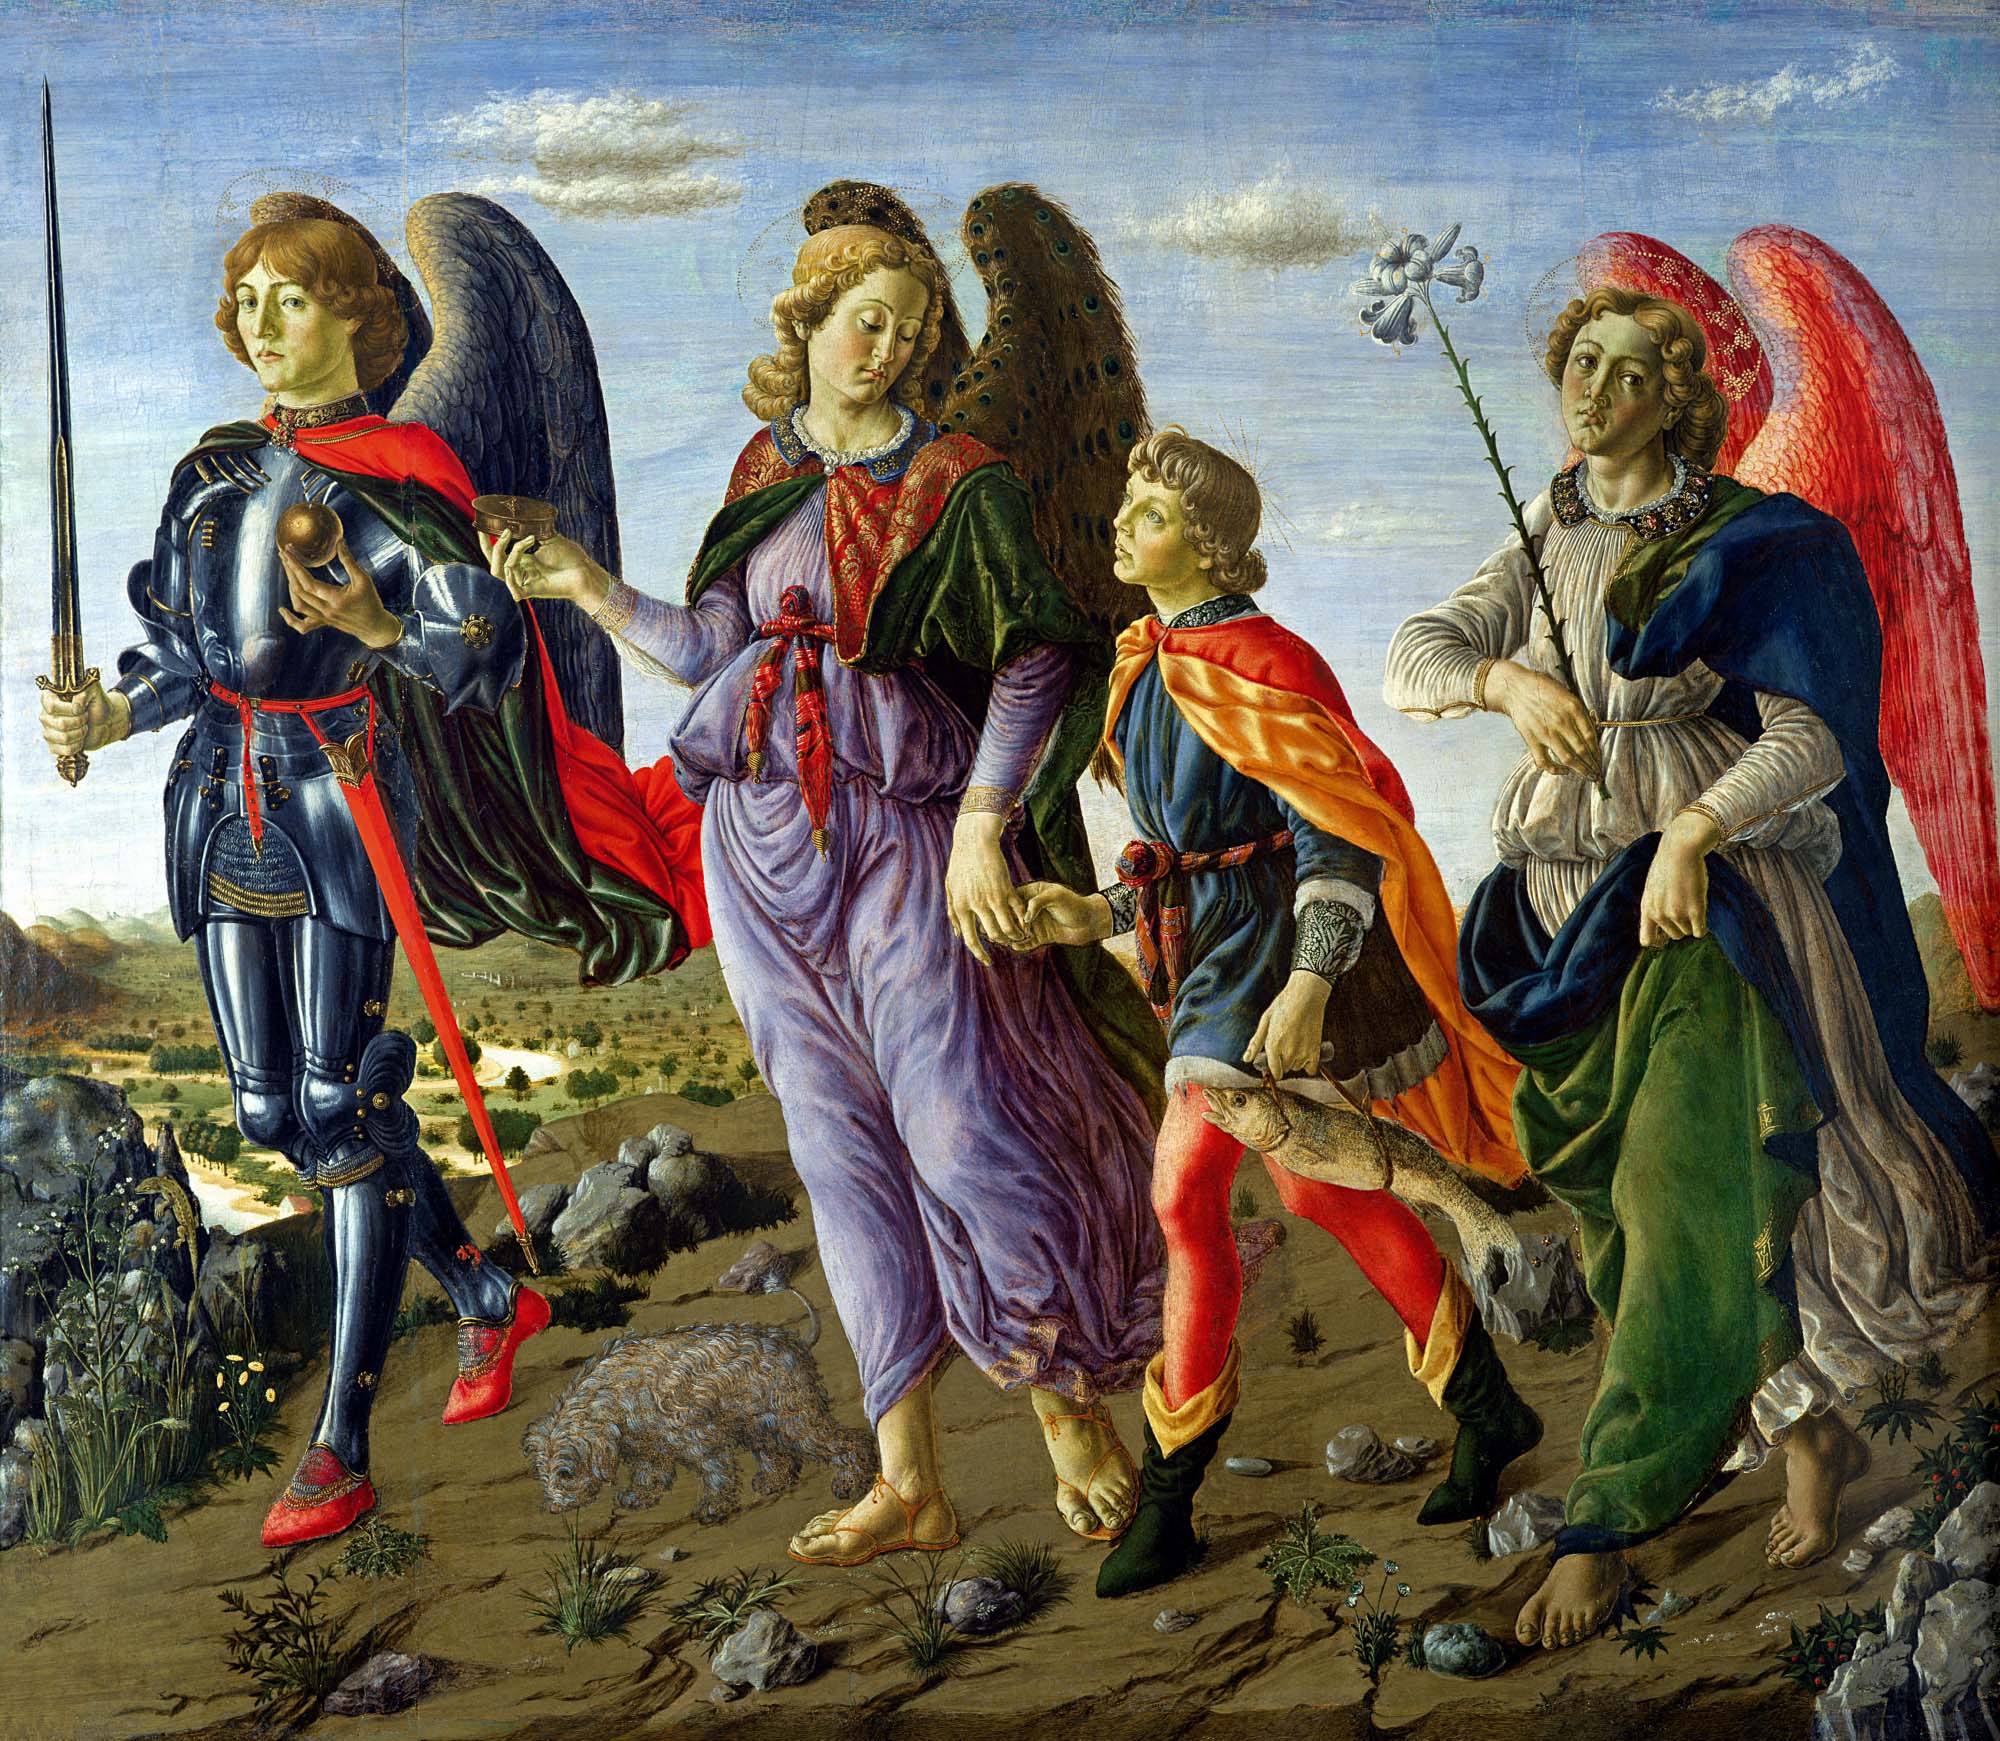 Painting by Francesco di Giovanni Botticini (1446-1498) of the three archangels (from left to right Michael, Raphael, Gabriel) with young Tobias (1470 - Galleria degli Uffizi, Florence, Italy).